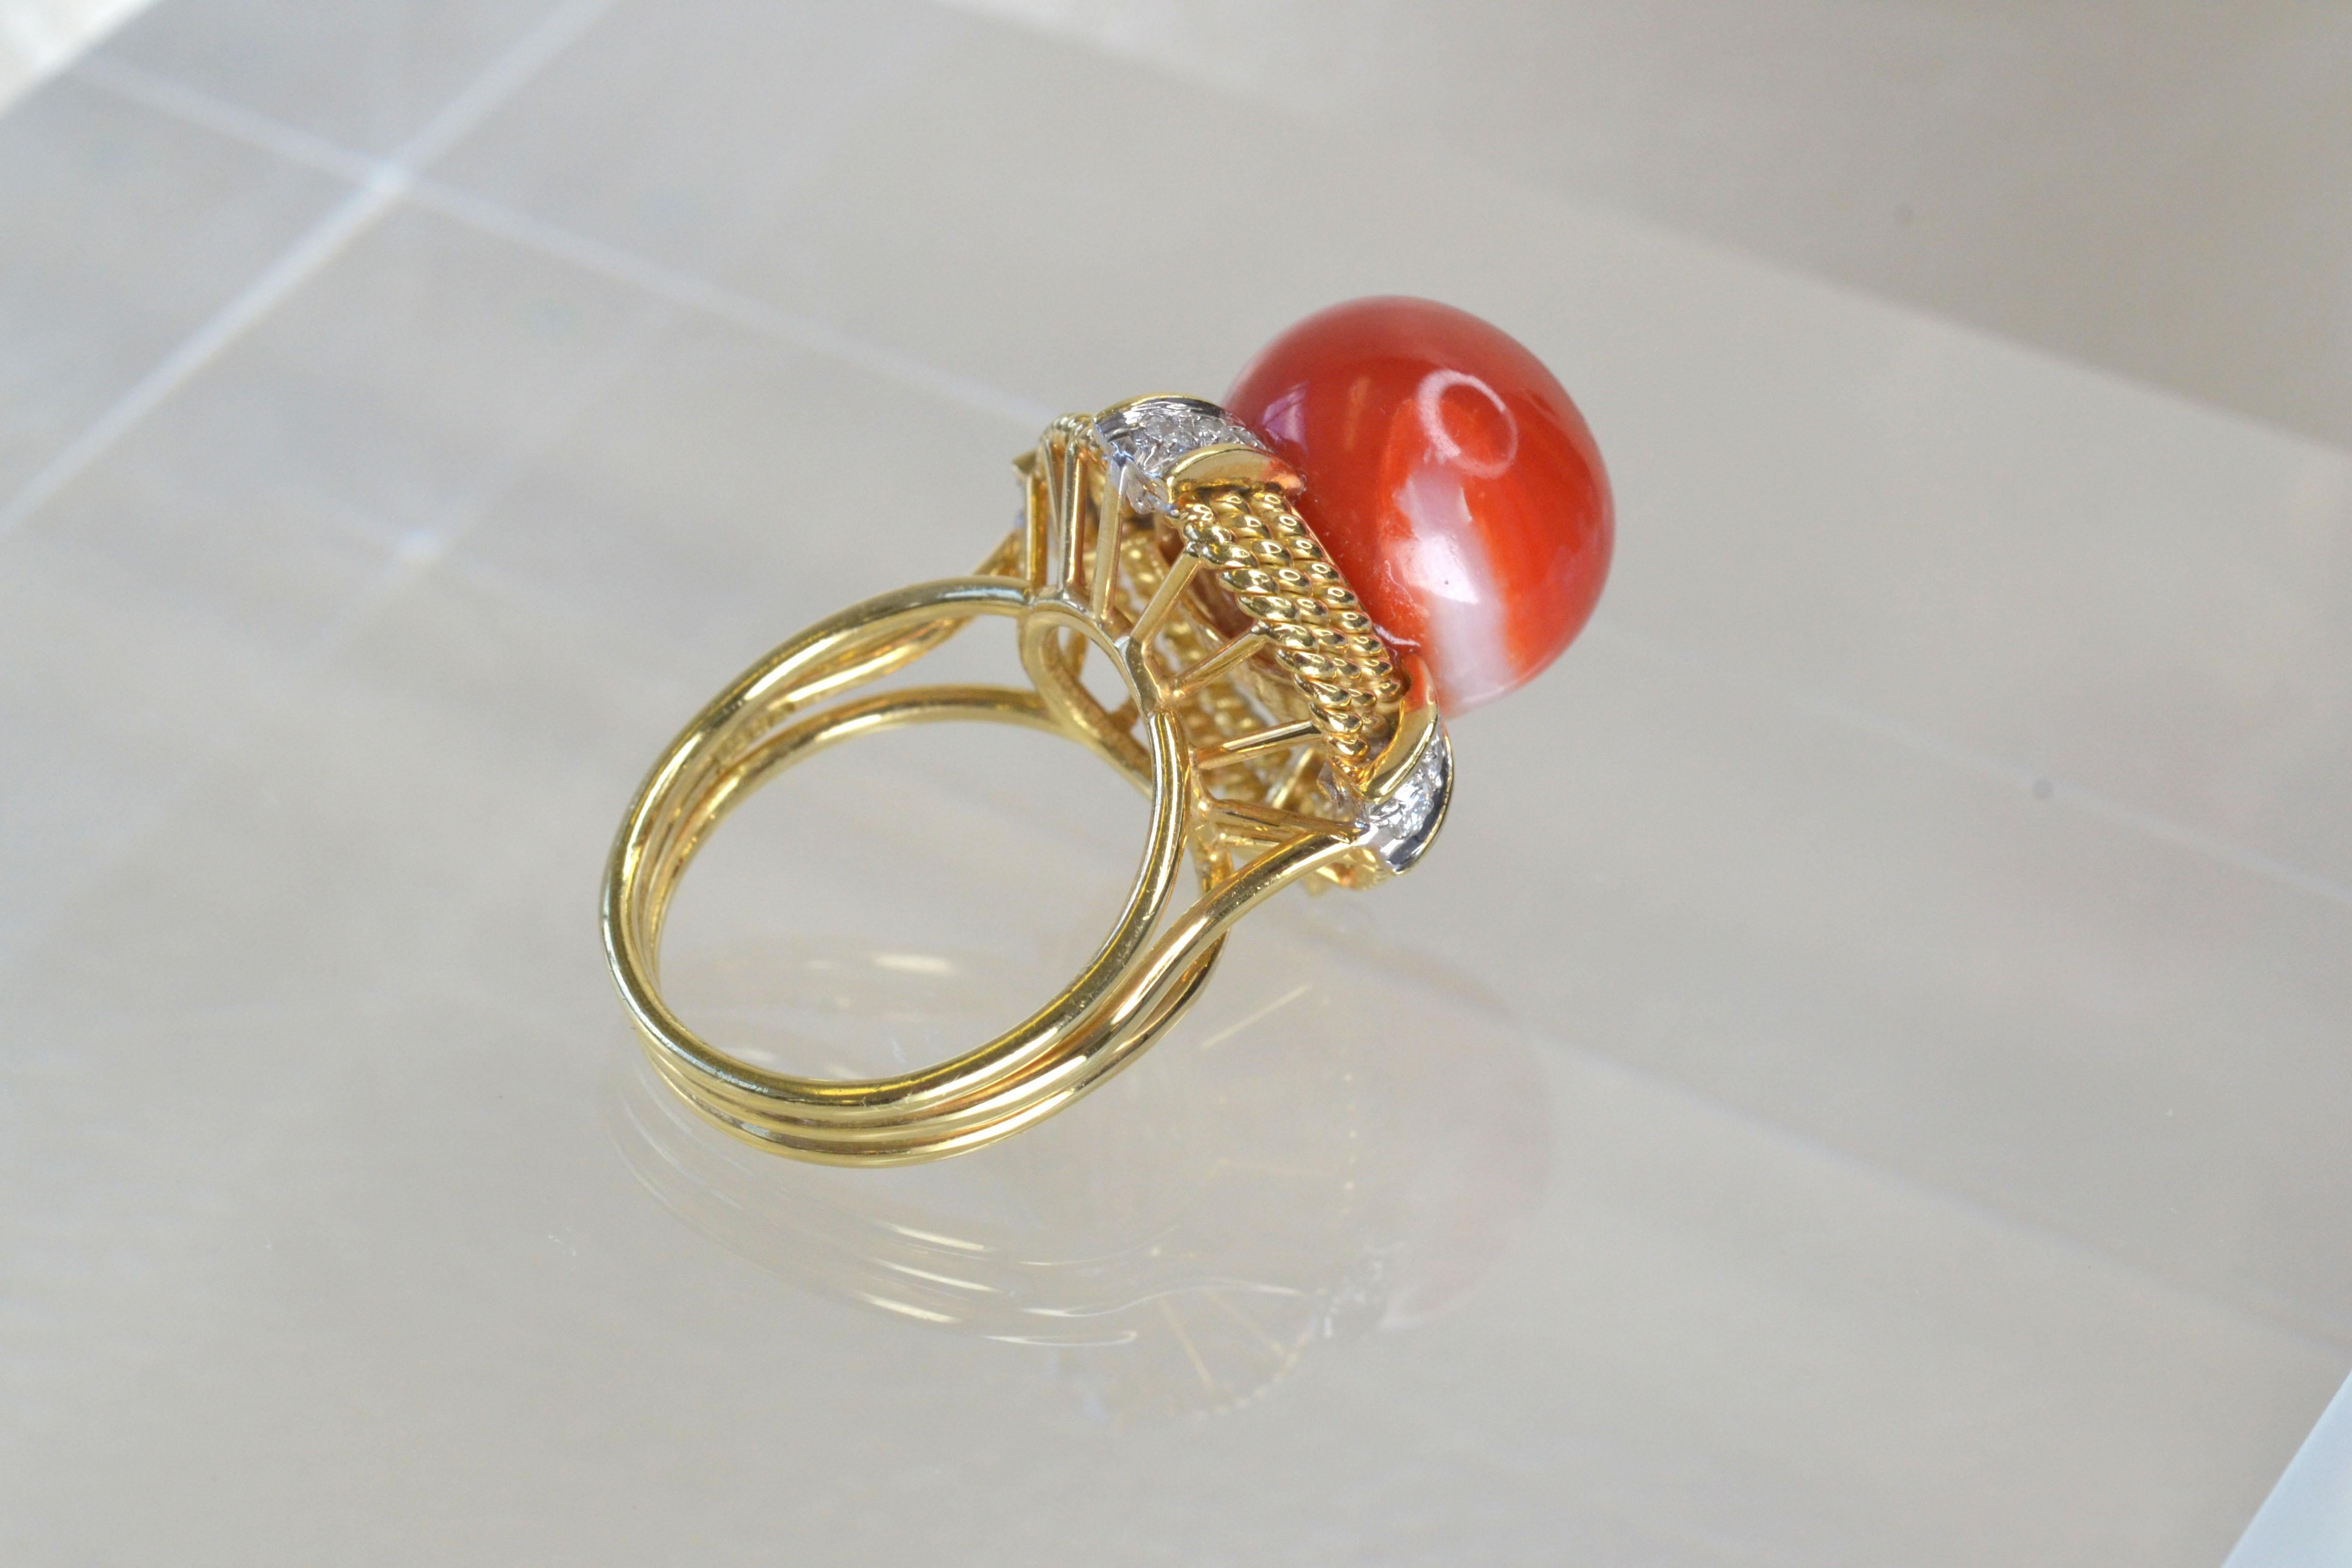 Women's Vintage 14k Gold Coral Sphere Ring with White Diamonds, One-of-a-kind For Sale